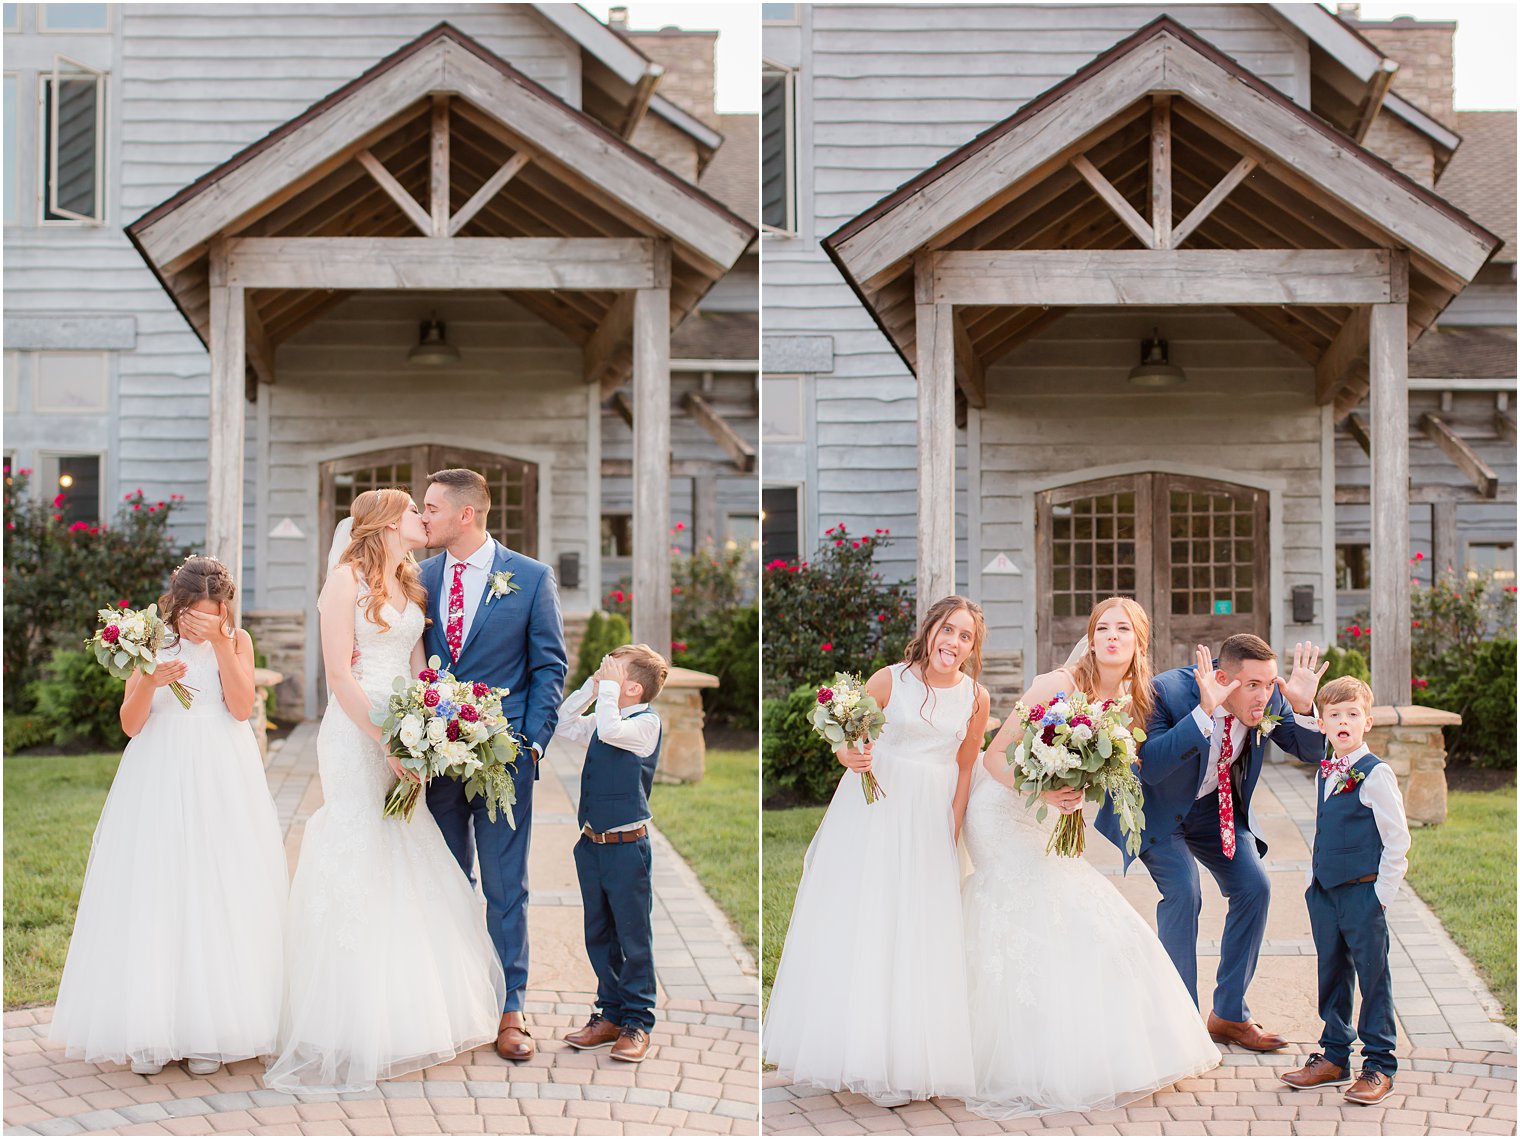 Silly photos of bride and groom with ring bearer and flower girl